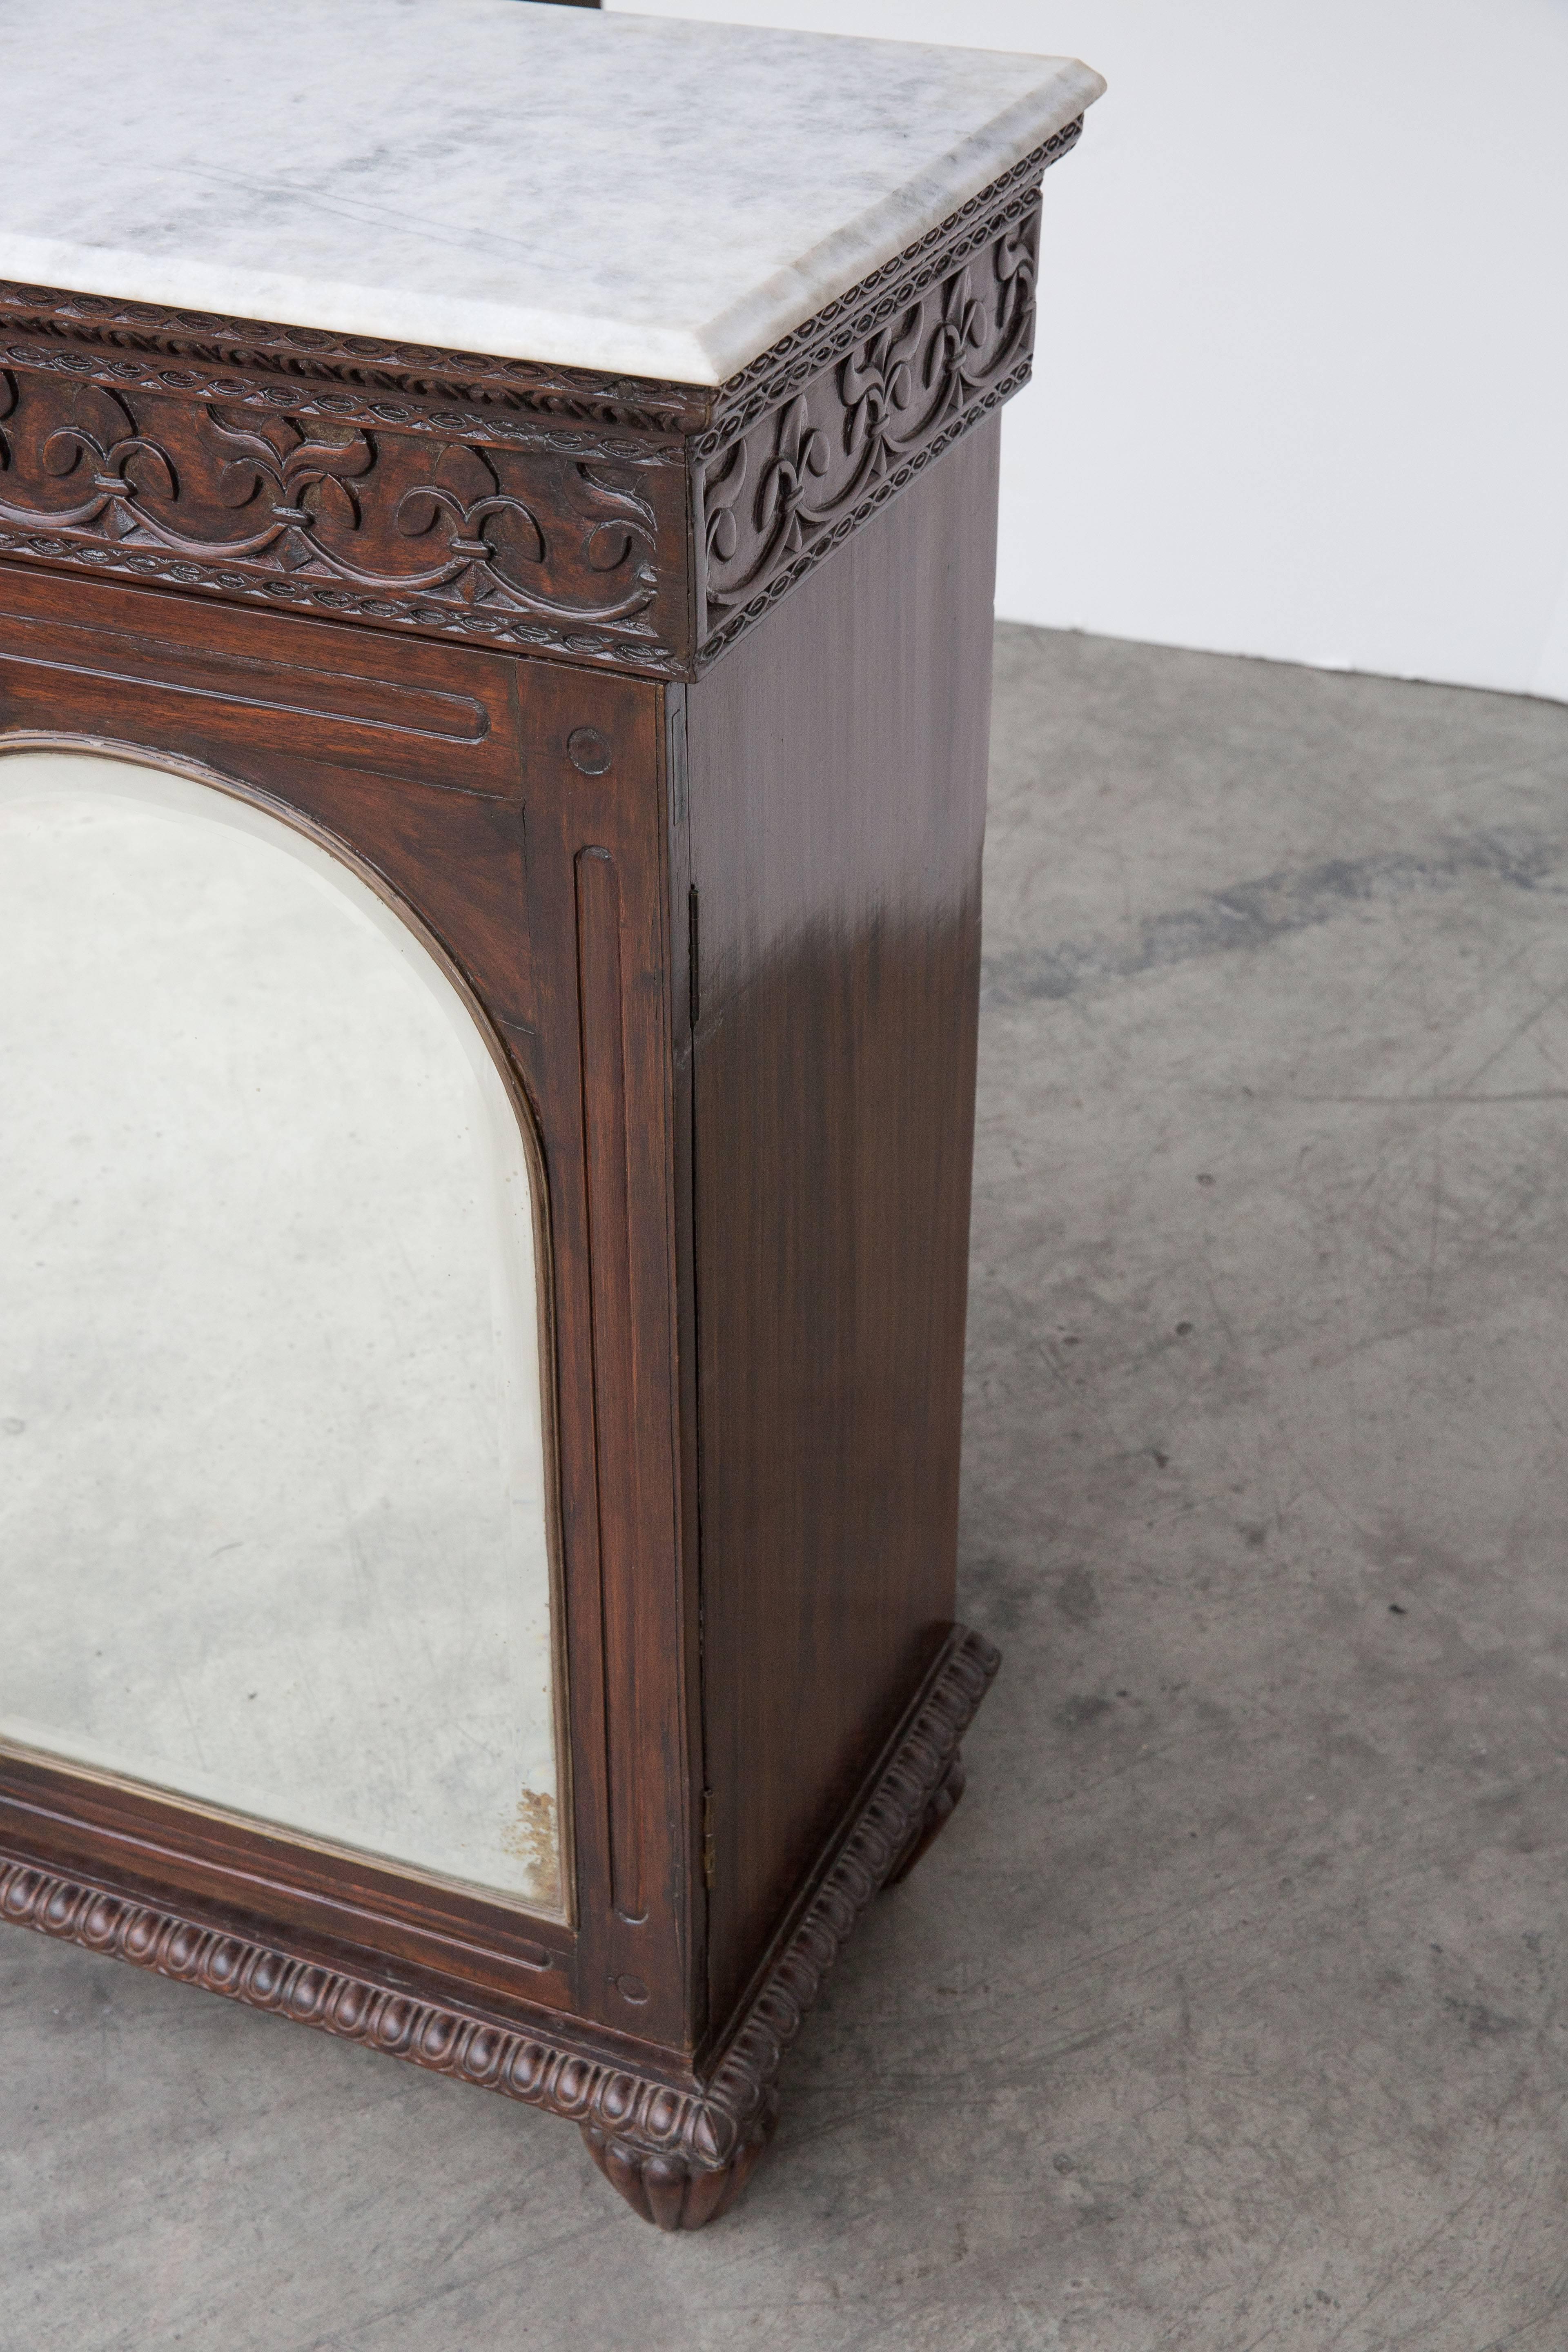 20th Century Anglo-Indian Marble-Top Cabinet